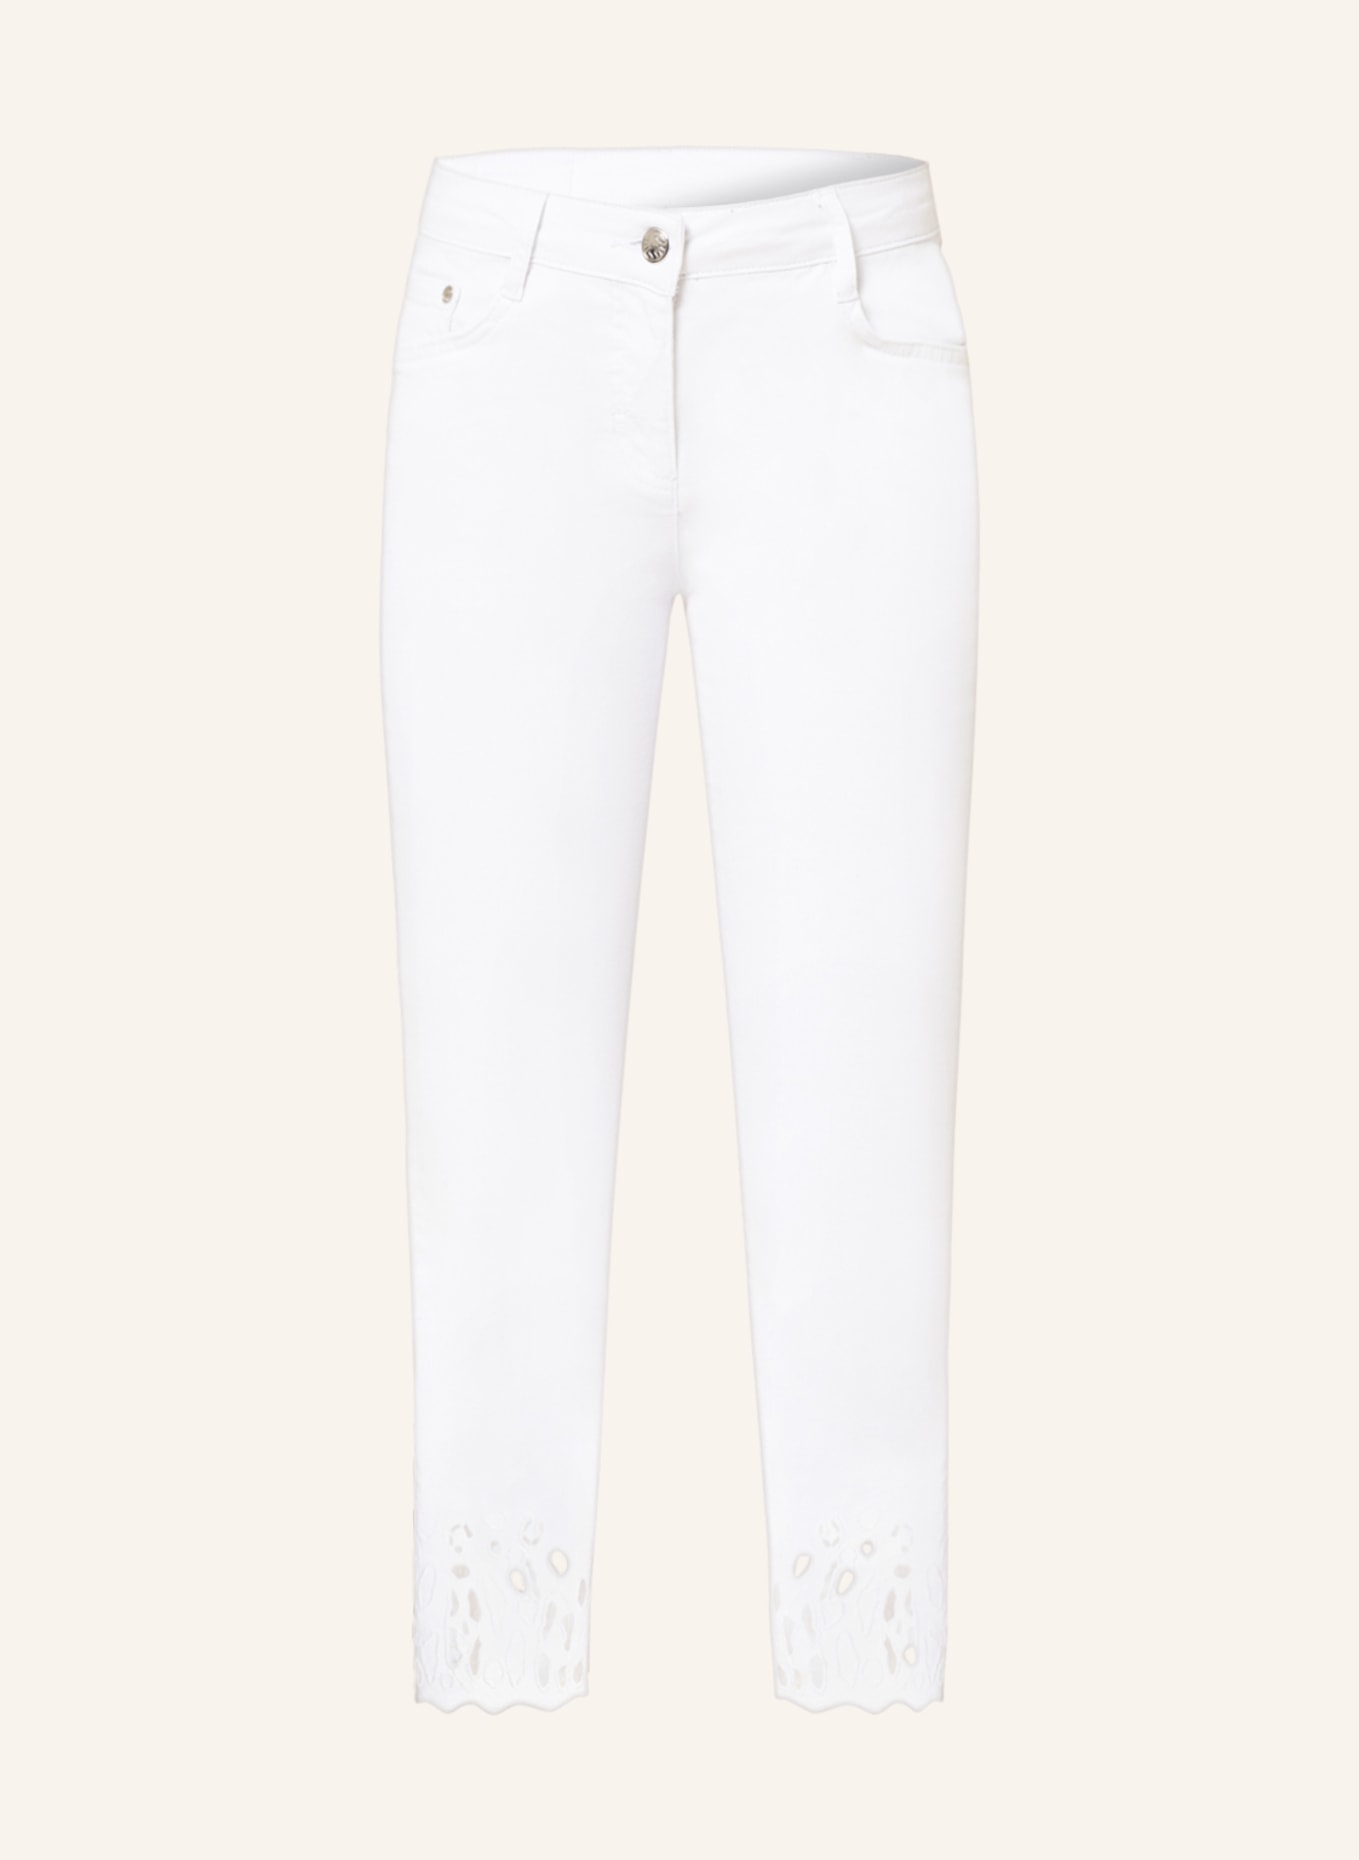 SPORTALM 7/8 jeans with embroidery, Color: 01 OPTICAL WHITE (Image 1)